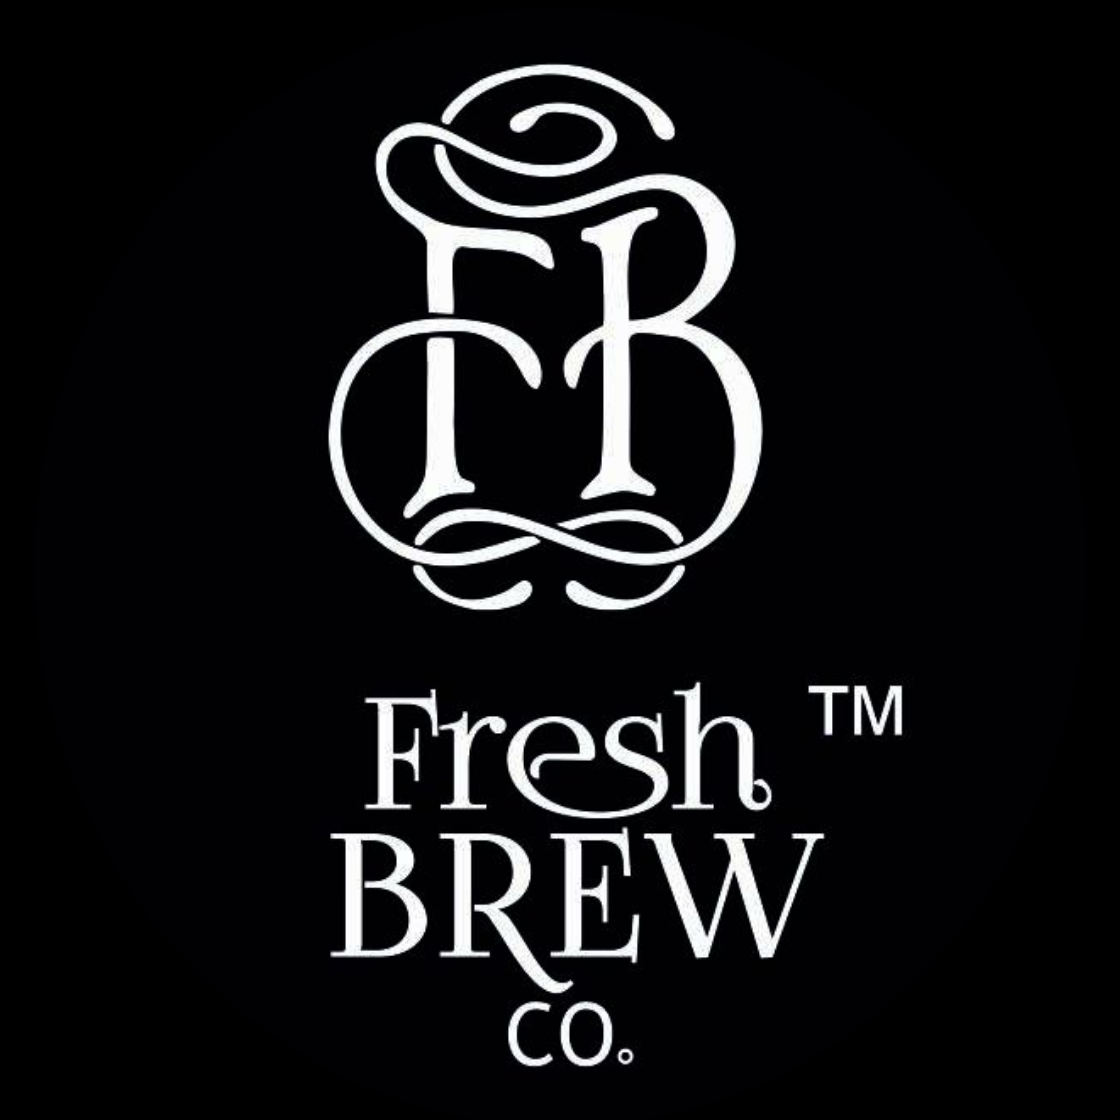 Fresh single serve artisan coffee is what we serve at the Fresh Brew Co - Delhi Other